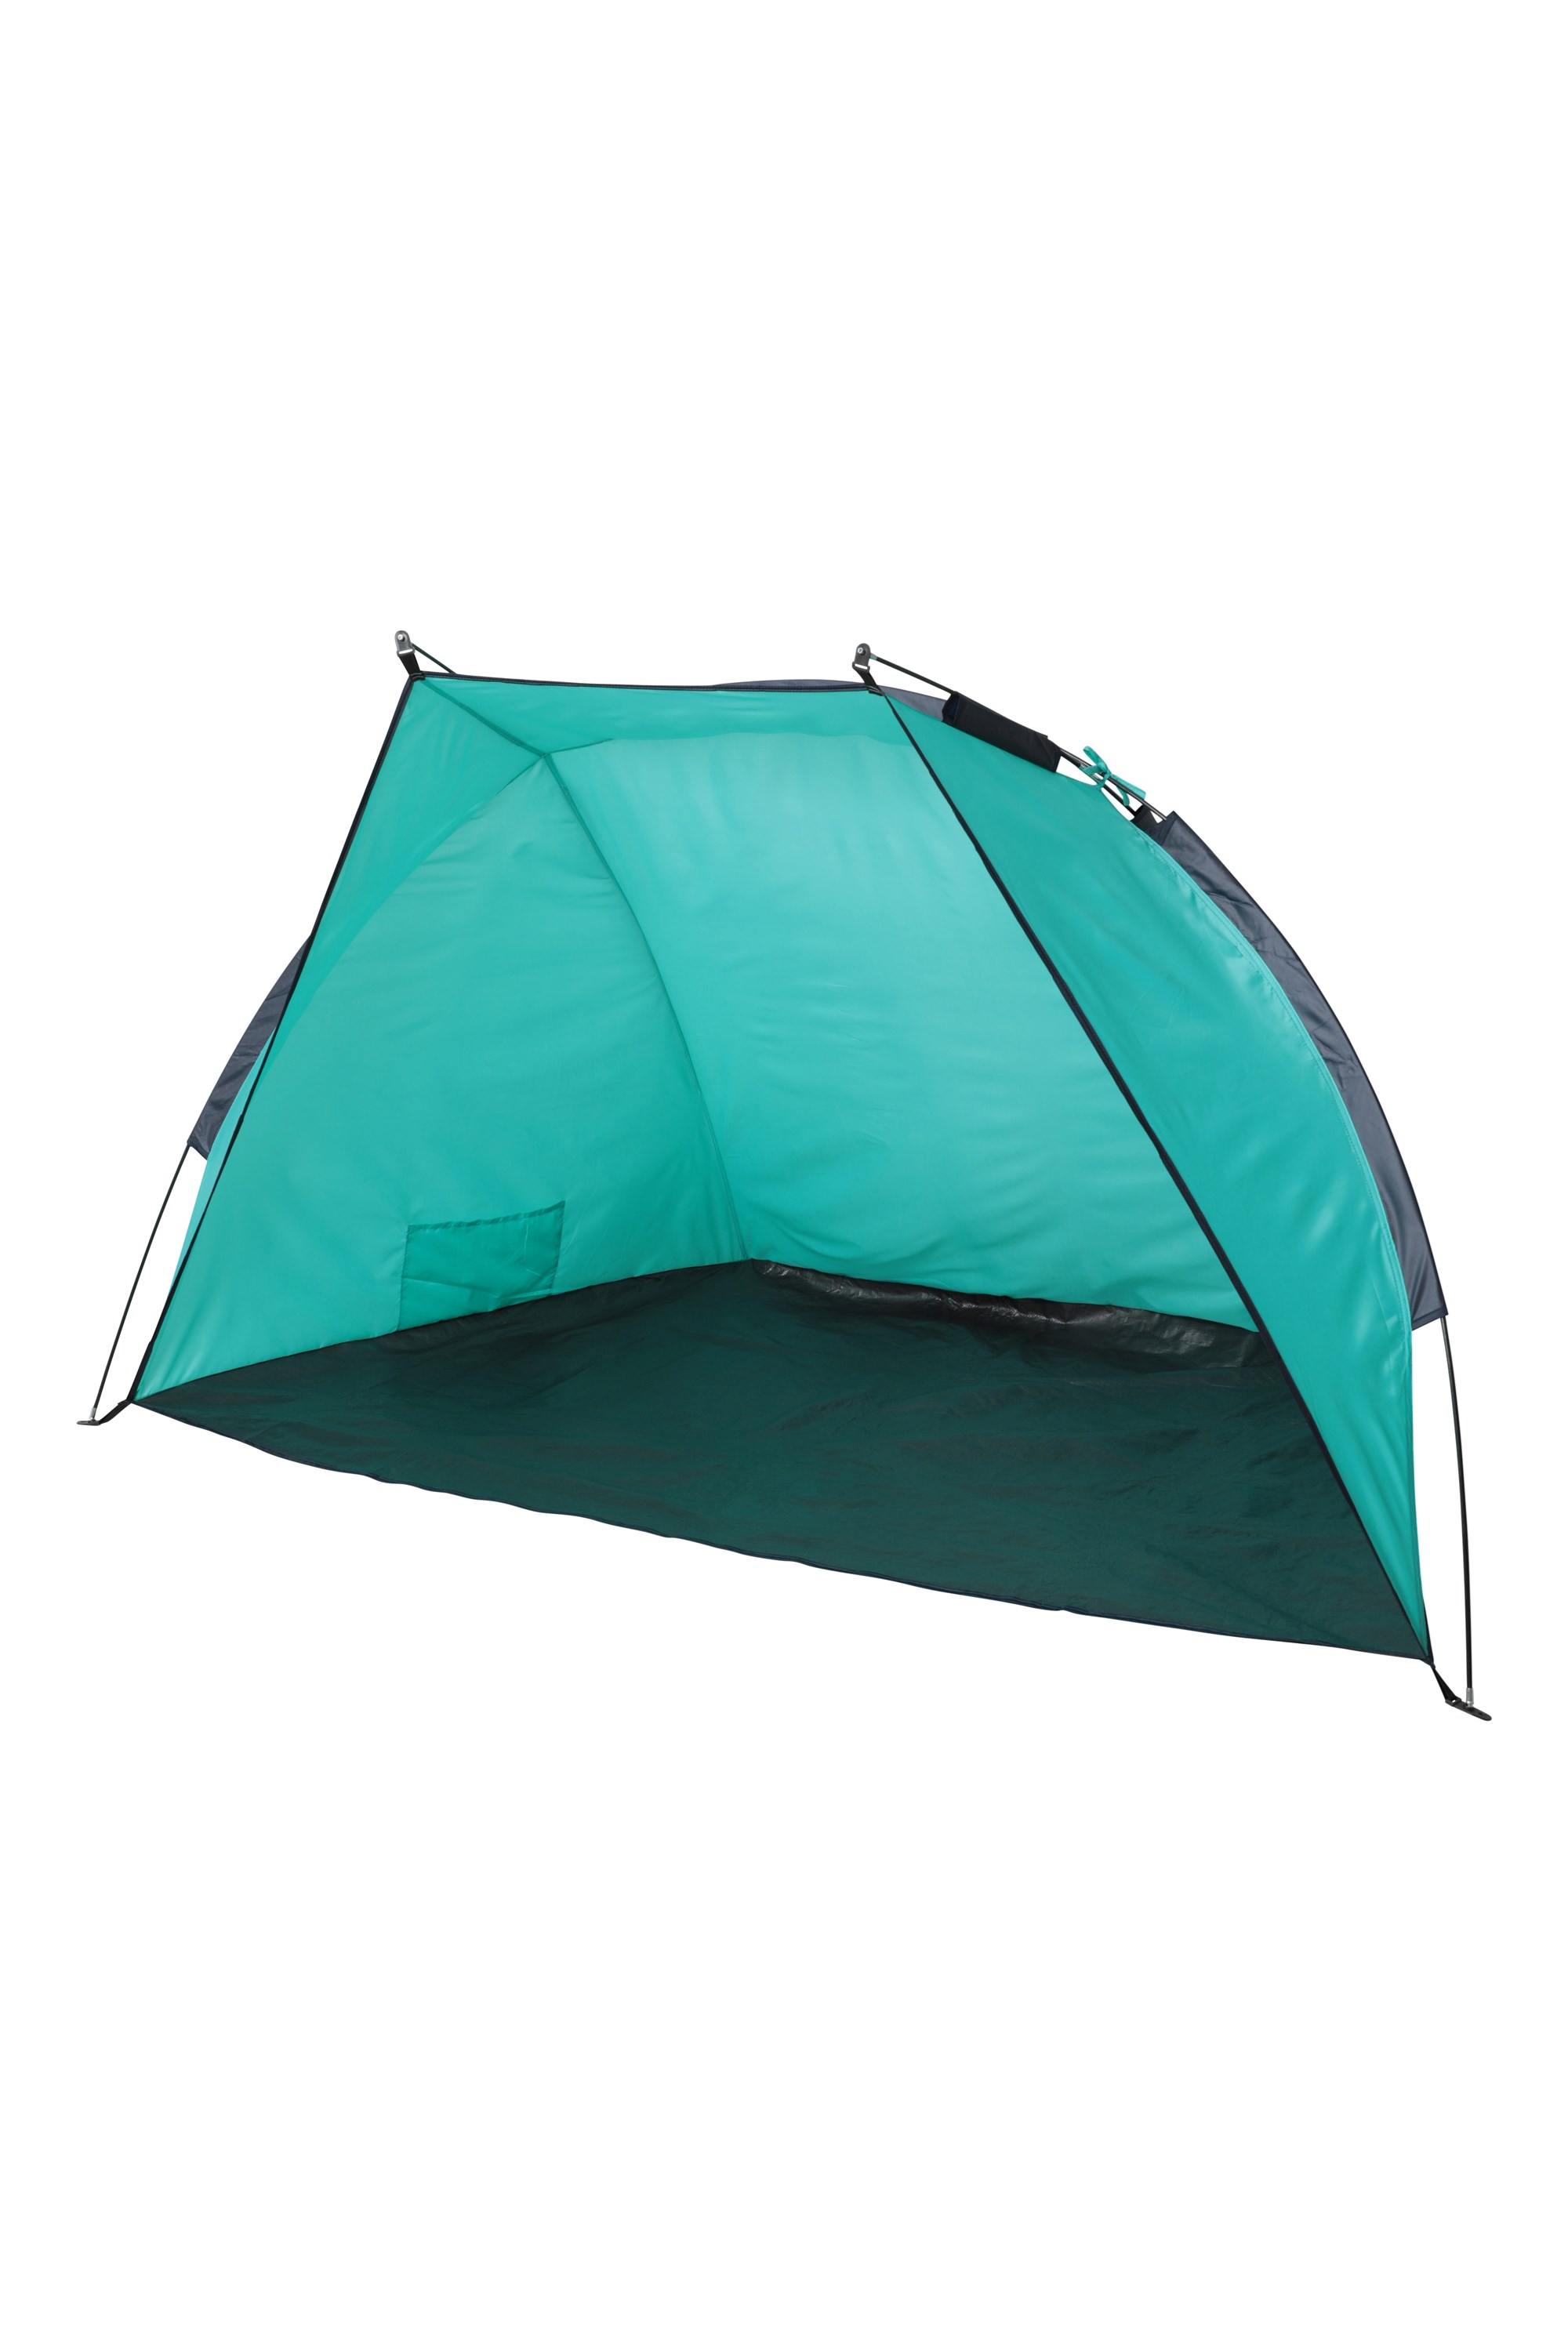 UV Protection Beach Shelter Tent